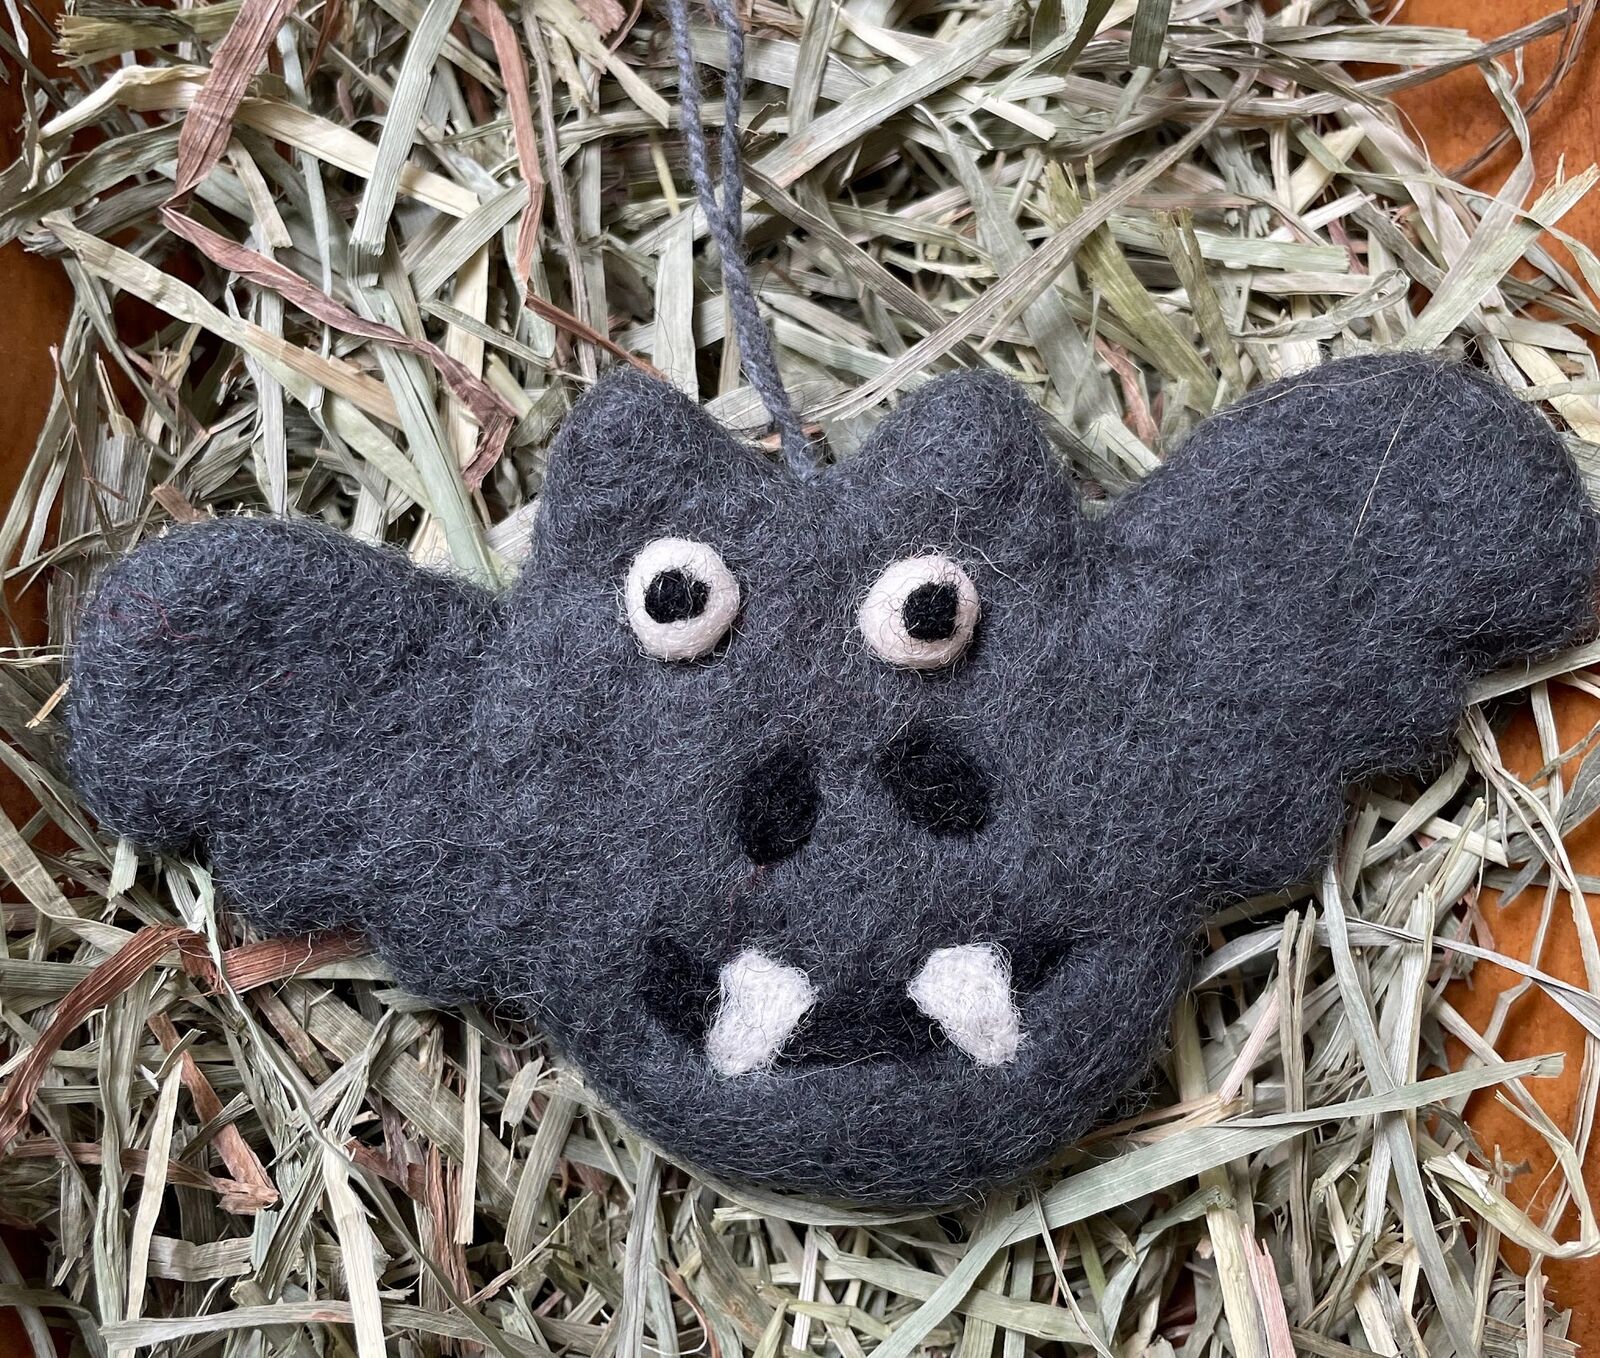 Primitive Handcrafted Wool Felted Halloween Spooky Bat Ornament - The Primitive Pineapple Collection